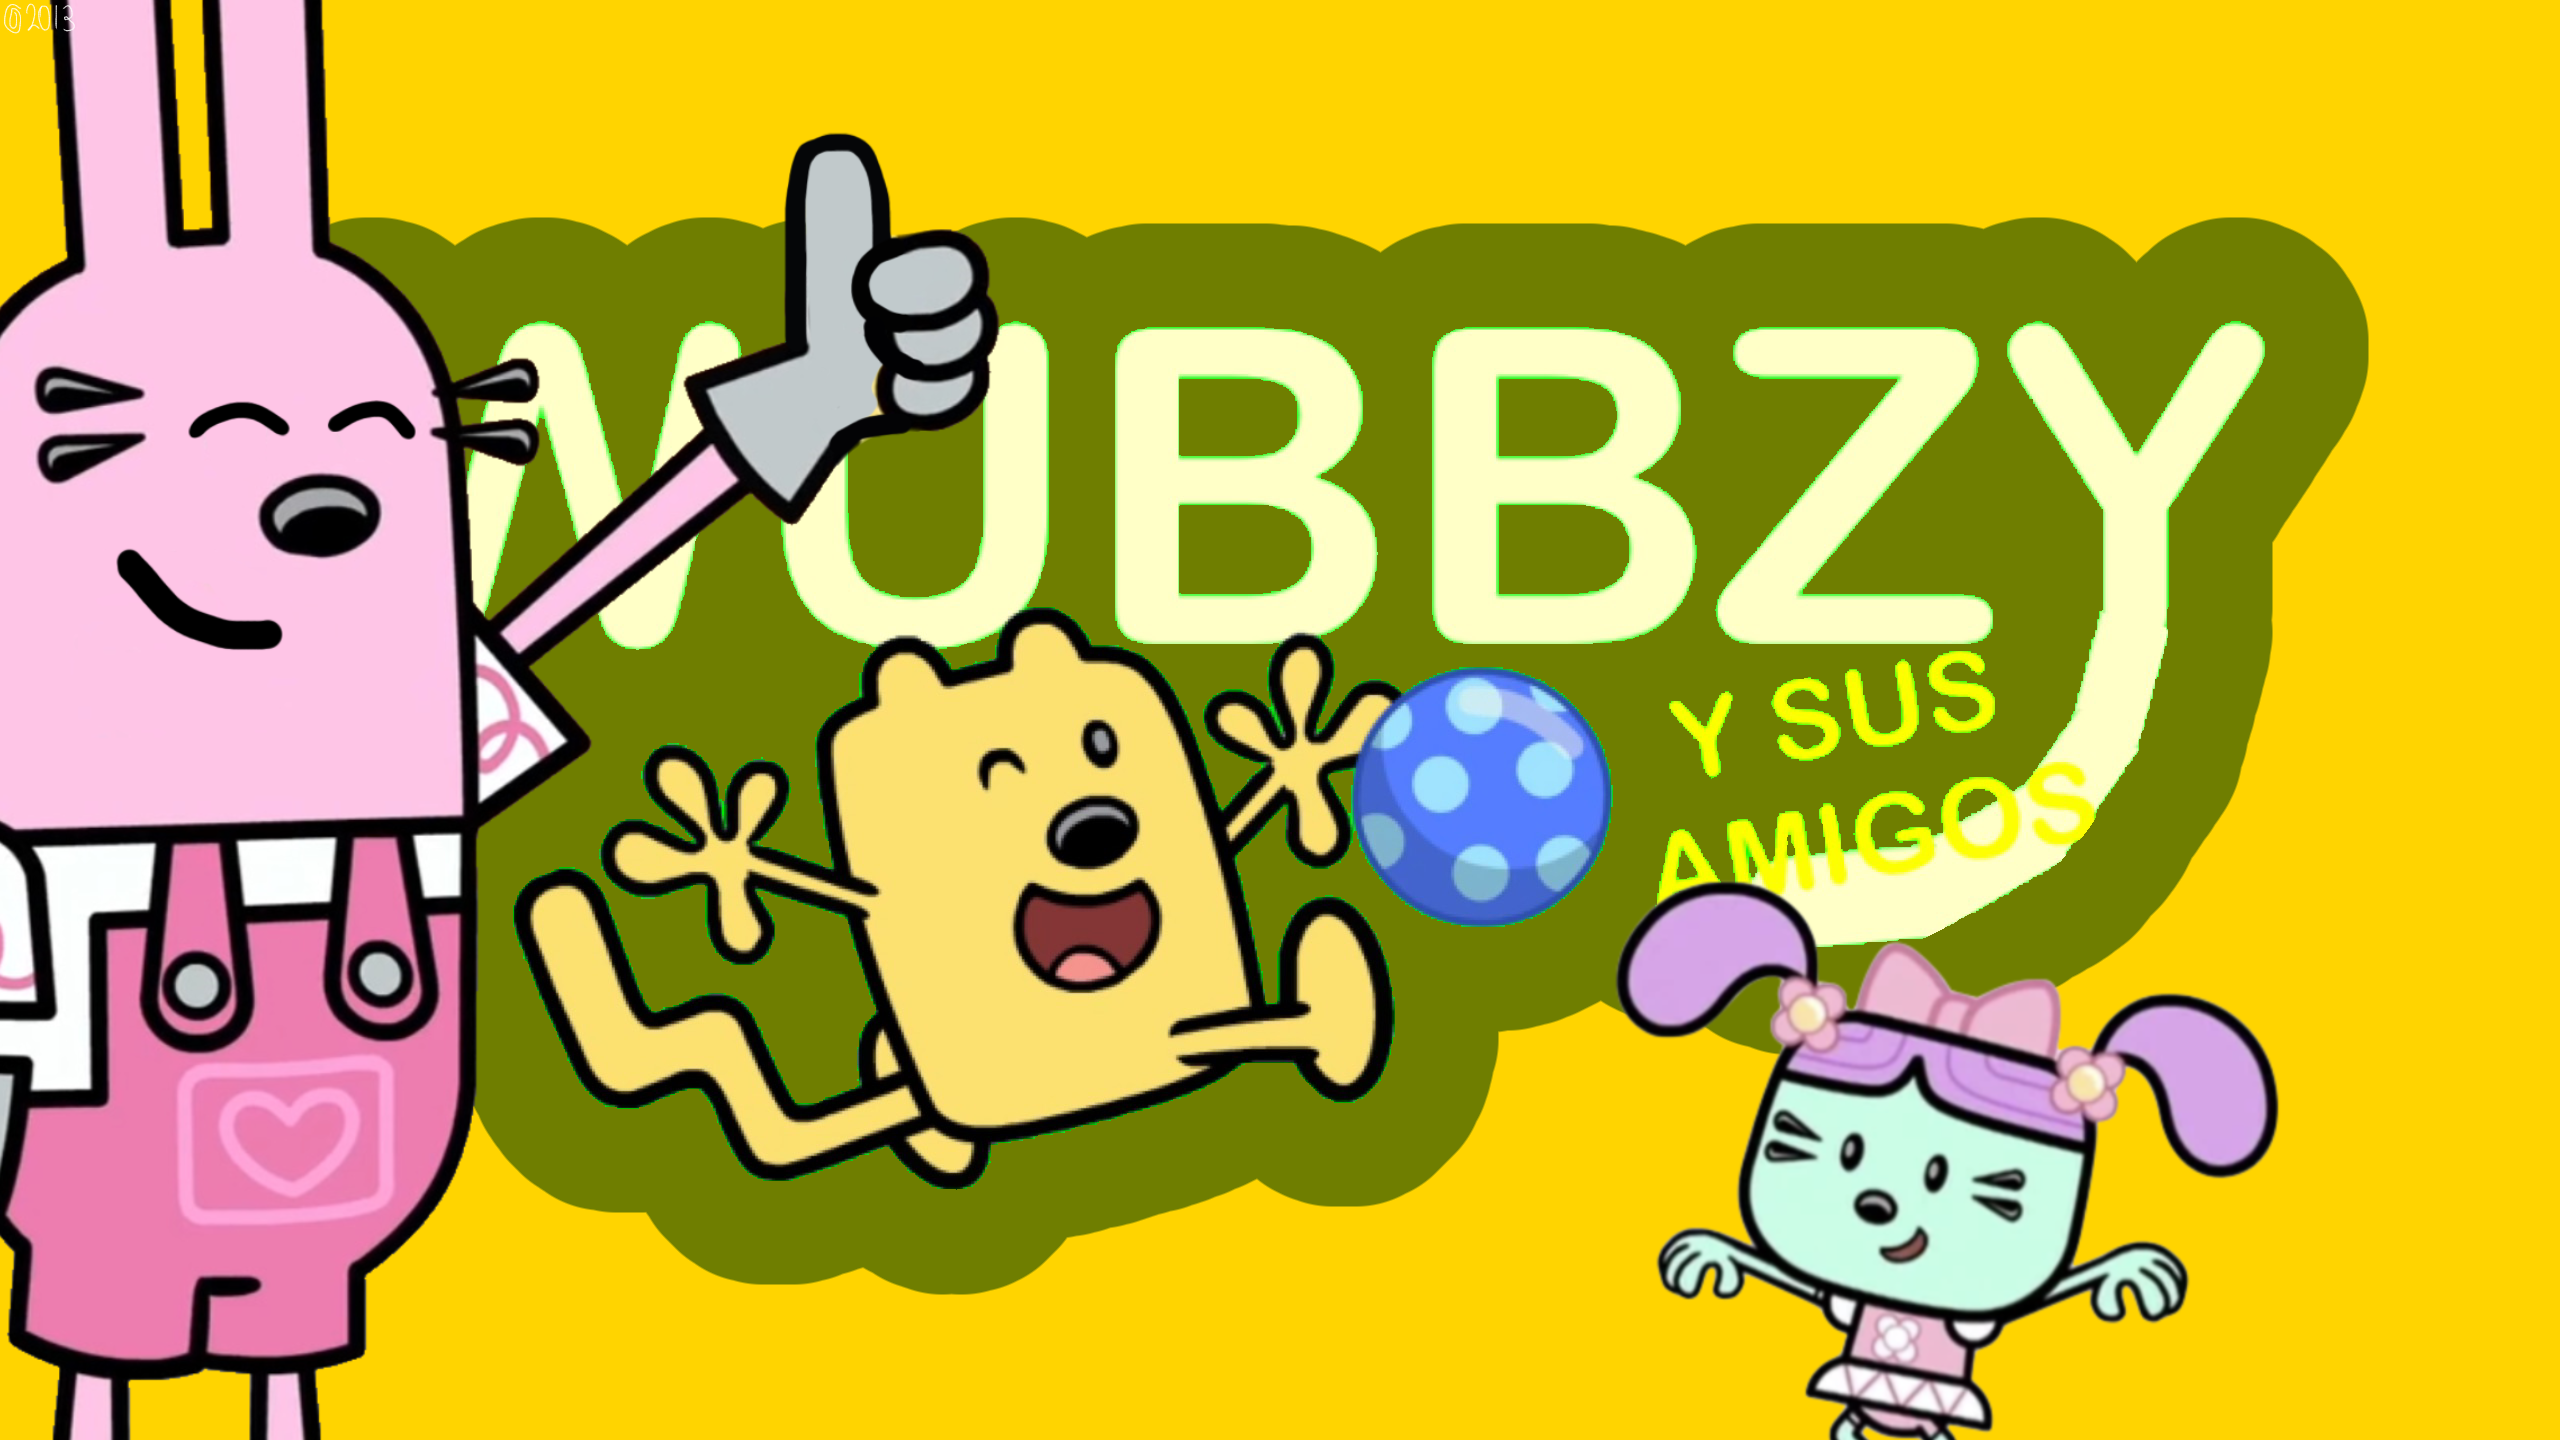 https://static.wikia.nocookie.net/iepfanon/images/e/ee/Wubbzy_y_Sus_Amigos_title.png/revision/latest?cb=20230117225504